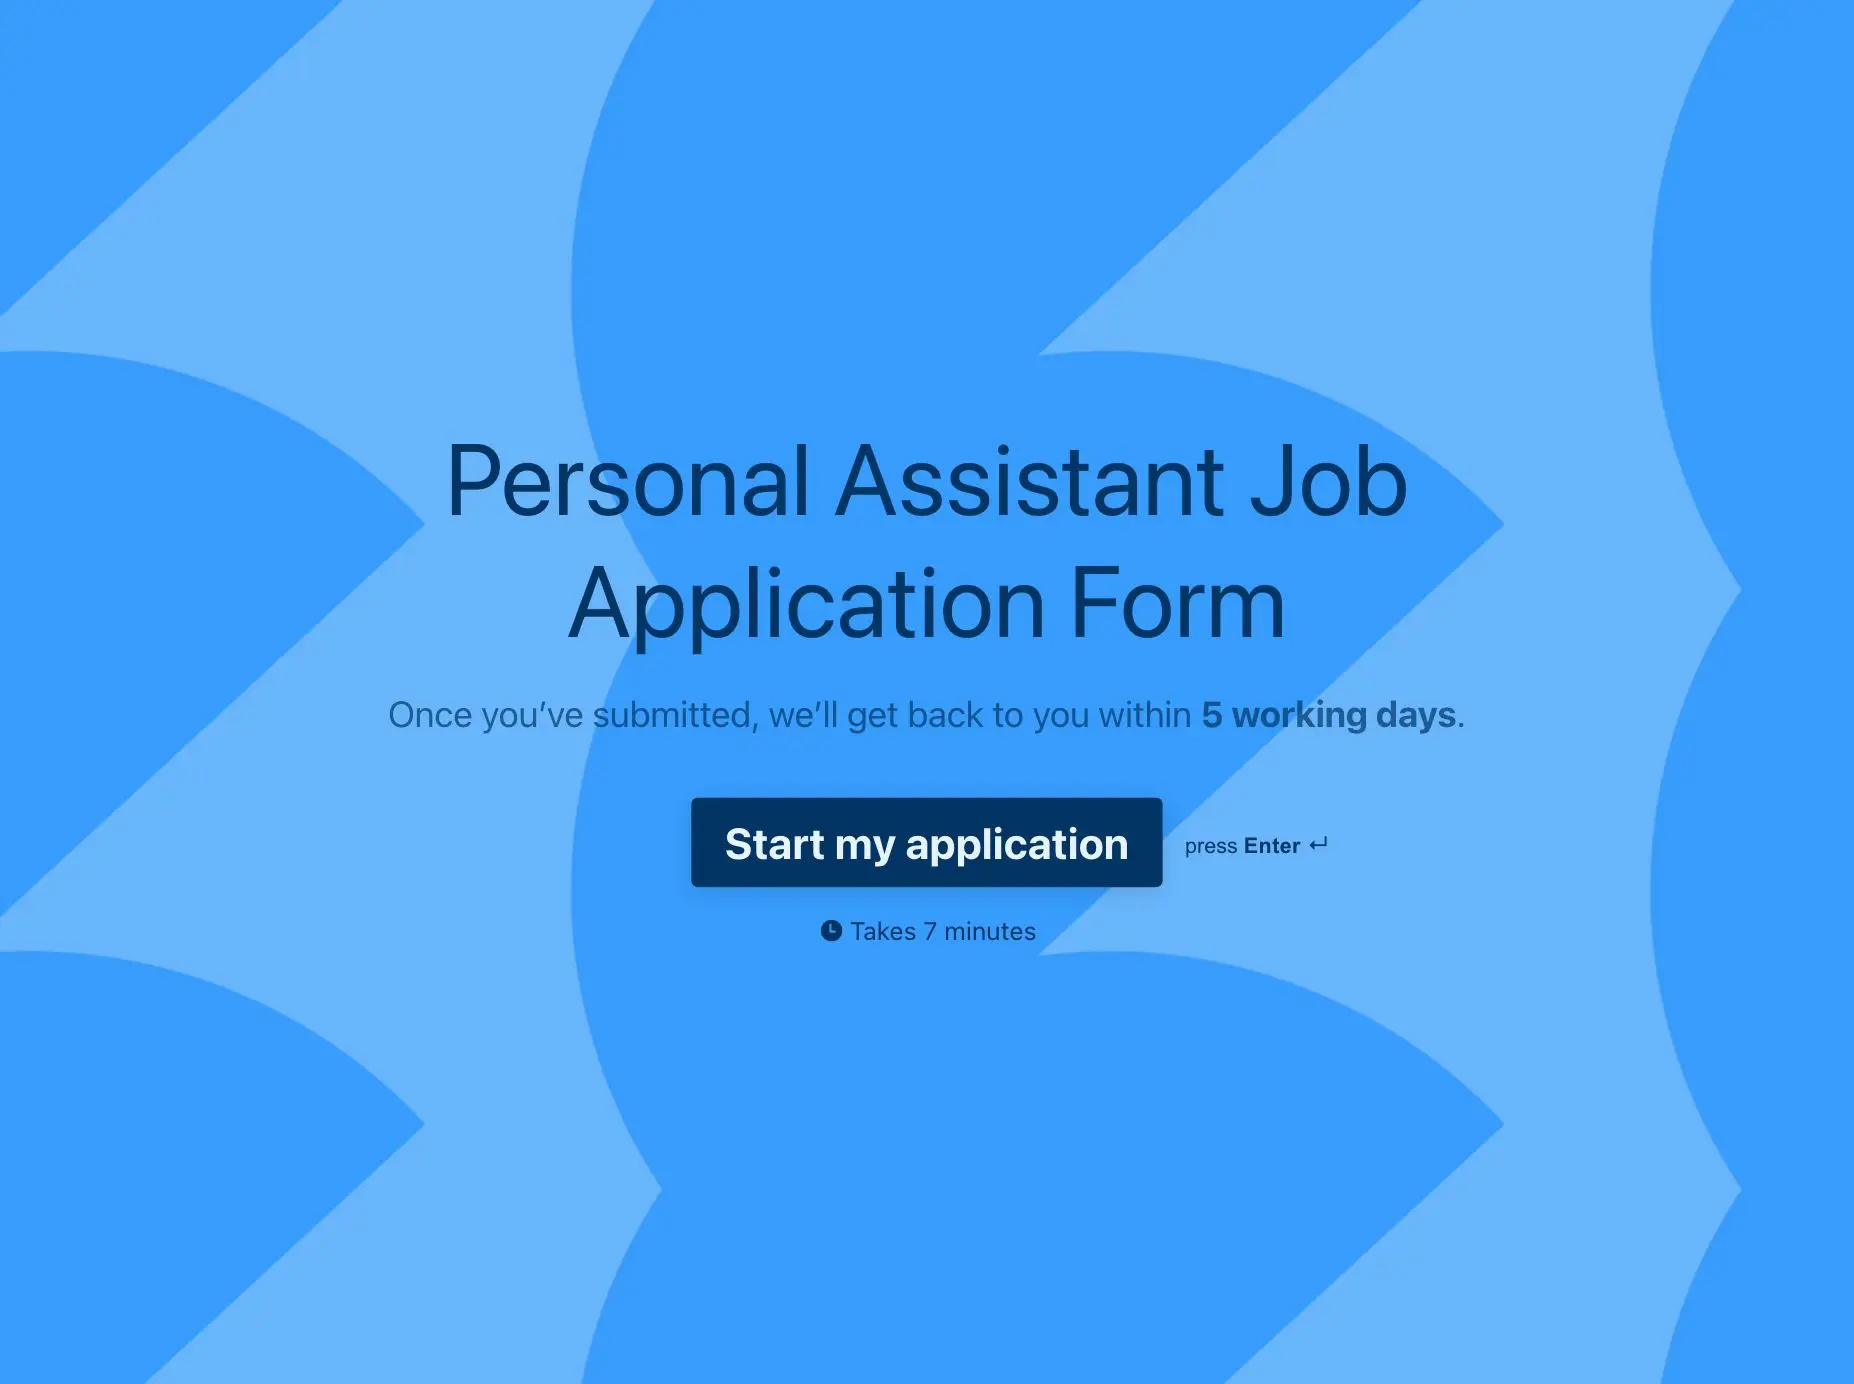 Personal Assistant Job Application Form Template Hero